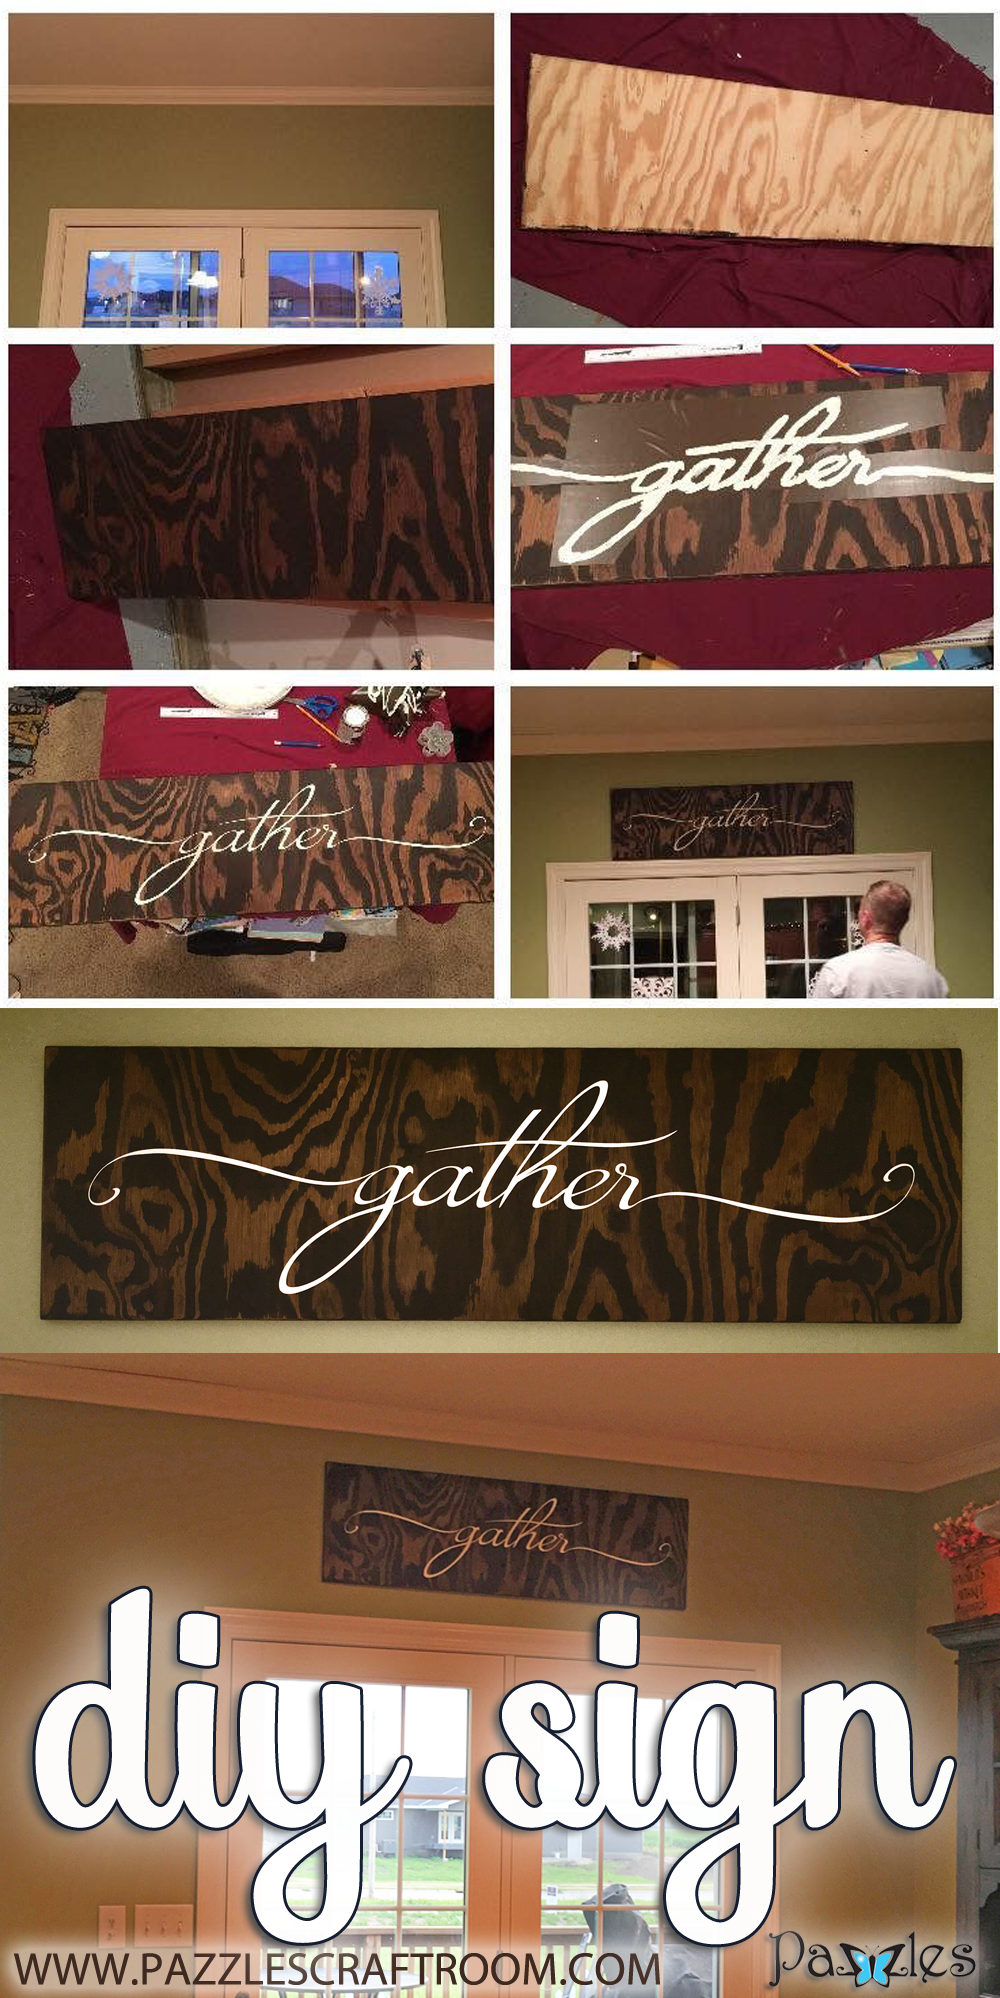 Pazzles DIY Dining Room Gather Painted Sign by Sara Weber